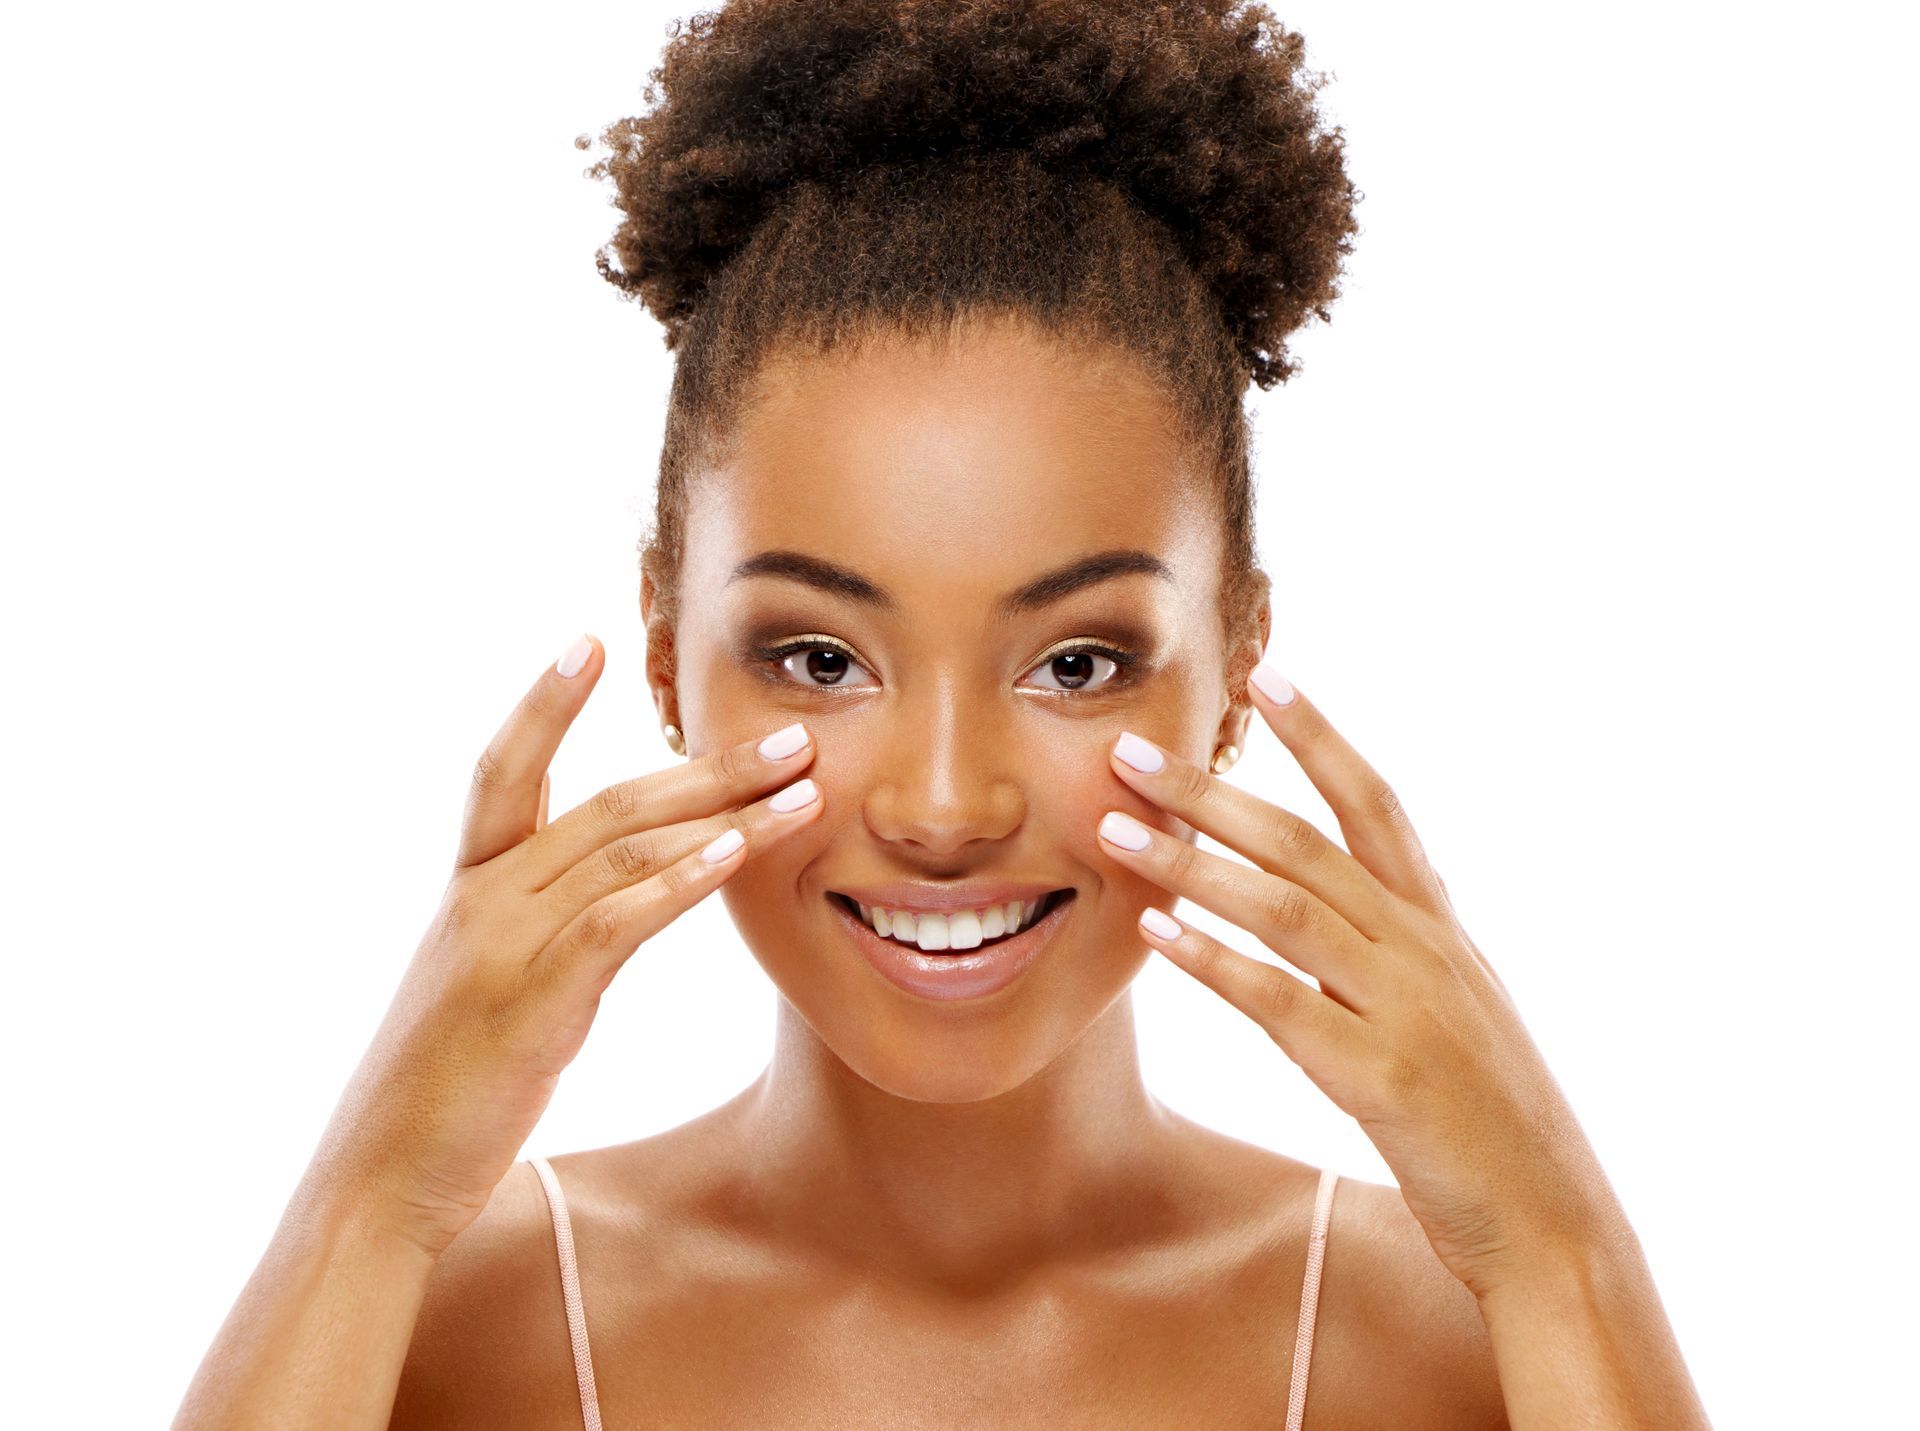 A woman is smiling and touching her face with her hands.